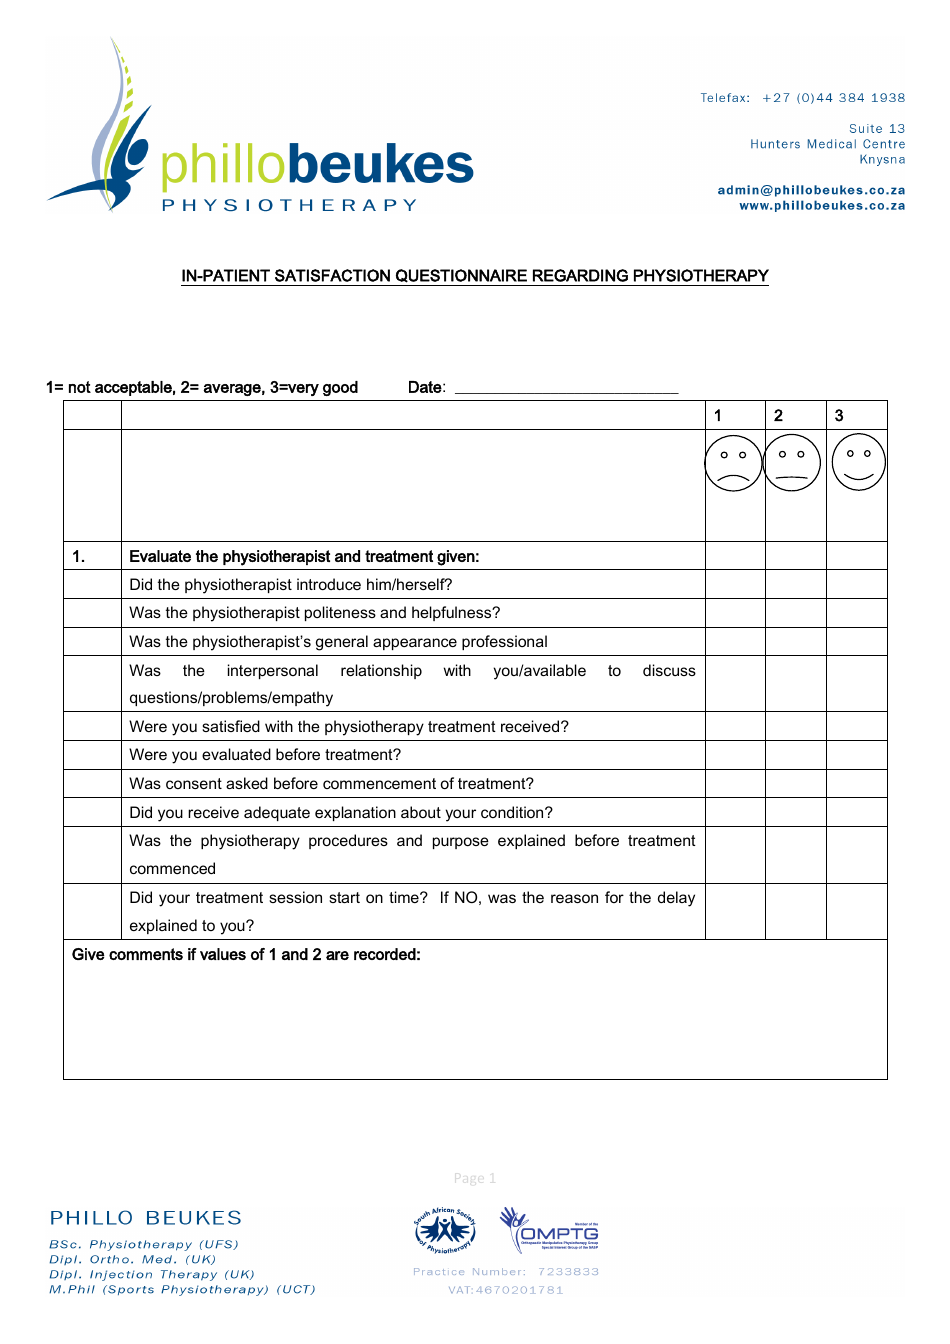 In-patient Satisfaction Questionnaire Regarding Physiotherapy by Phillo Beukes